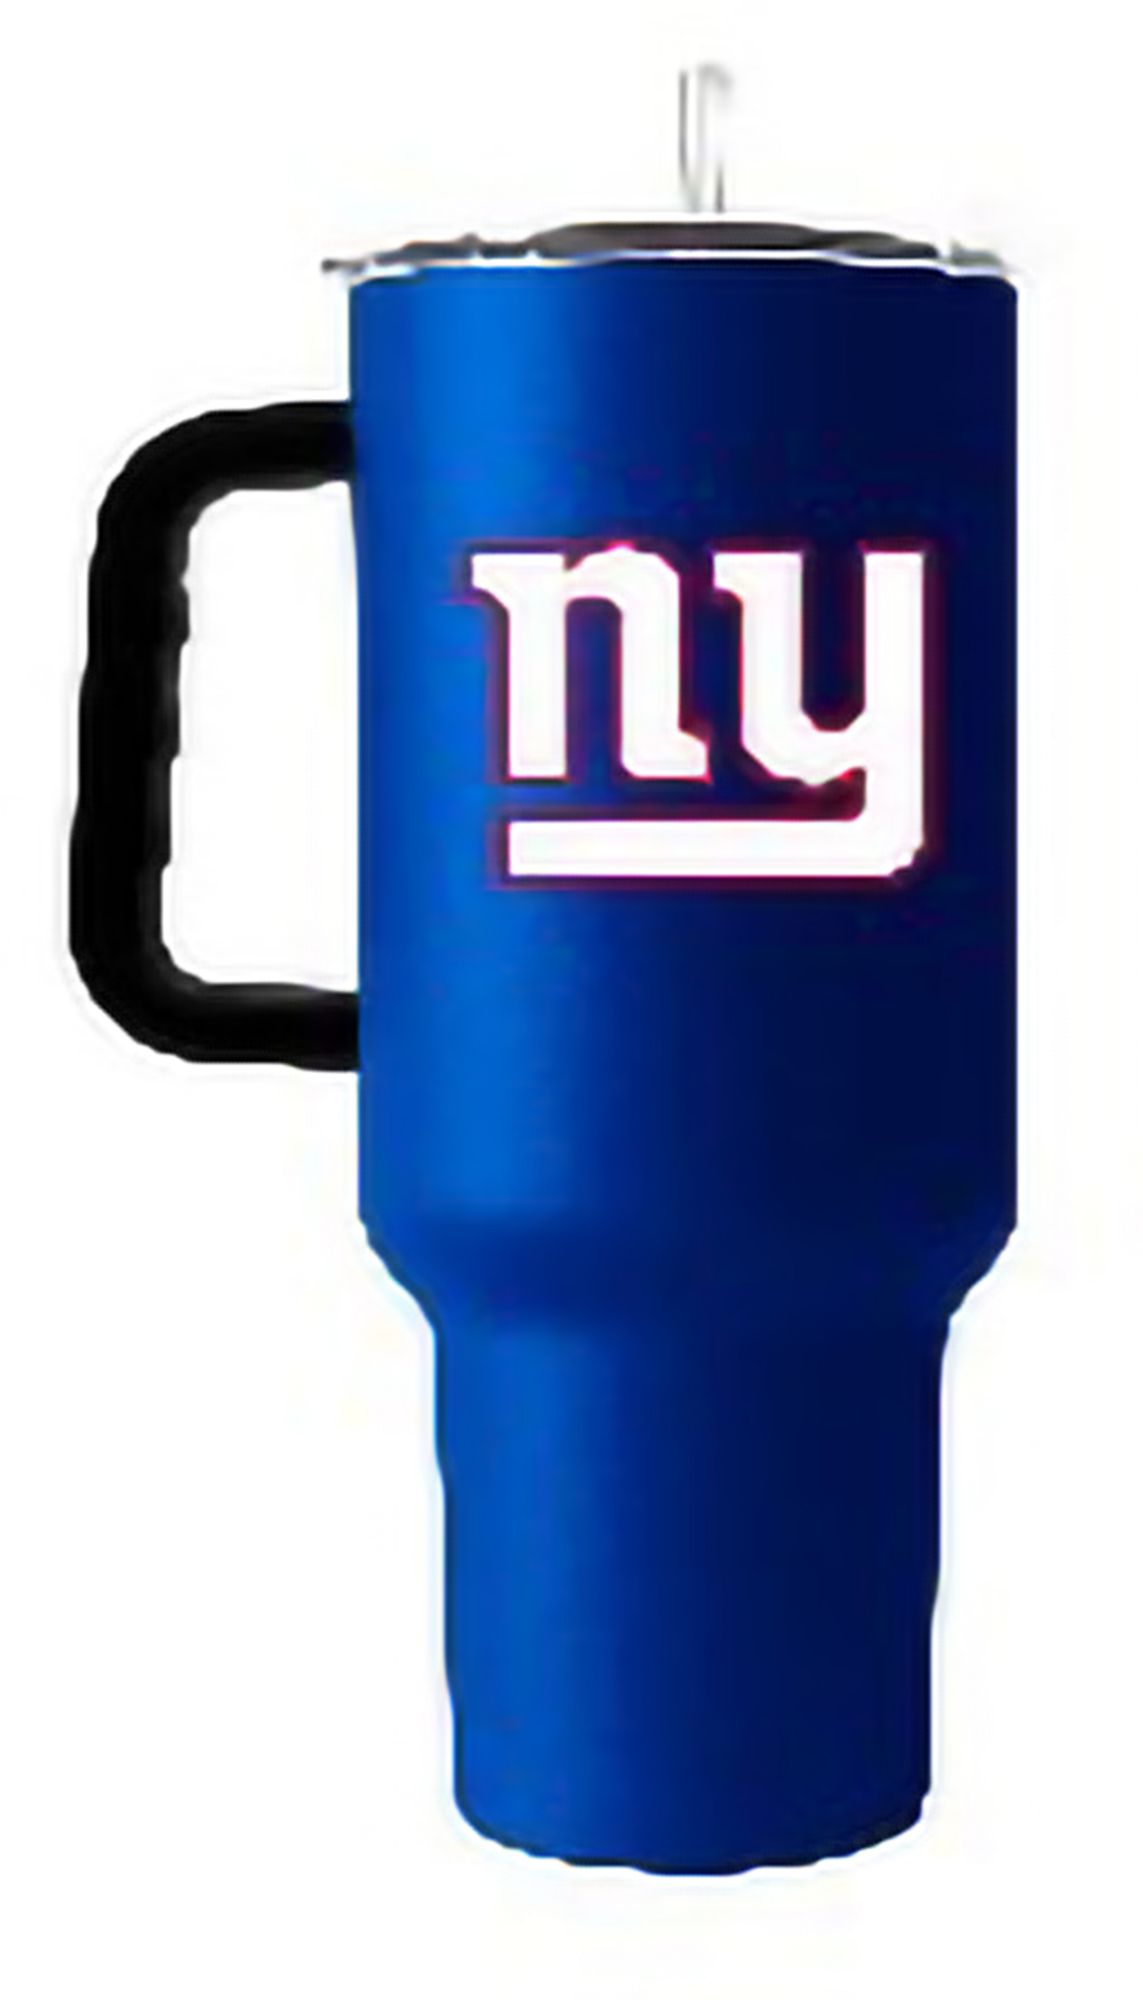 Tervis NFL New York Giants Touchdown 20 oz. Stainless Steel Tumbler with  Lid 1324207 - The Home Depot